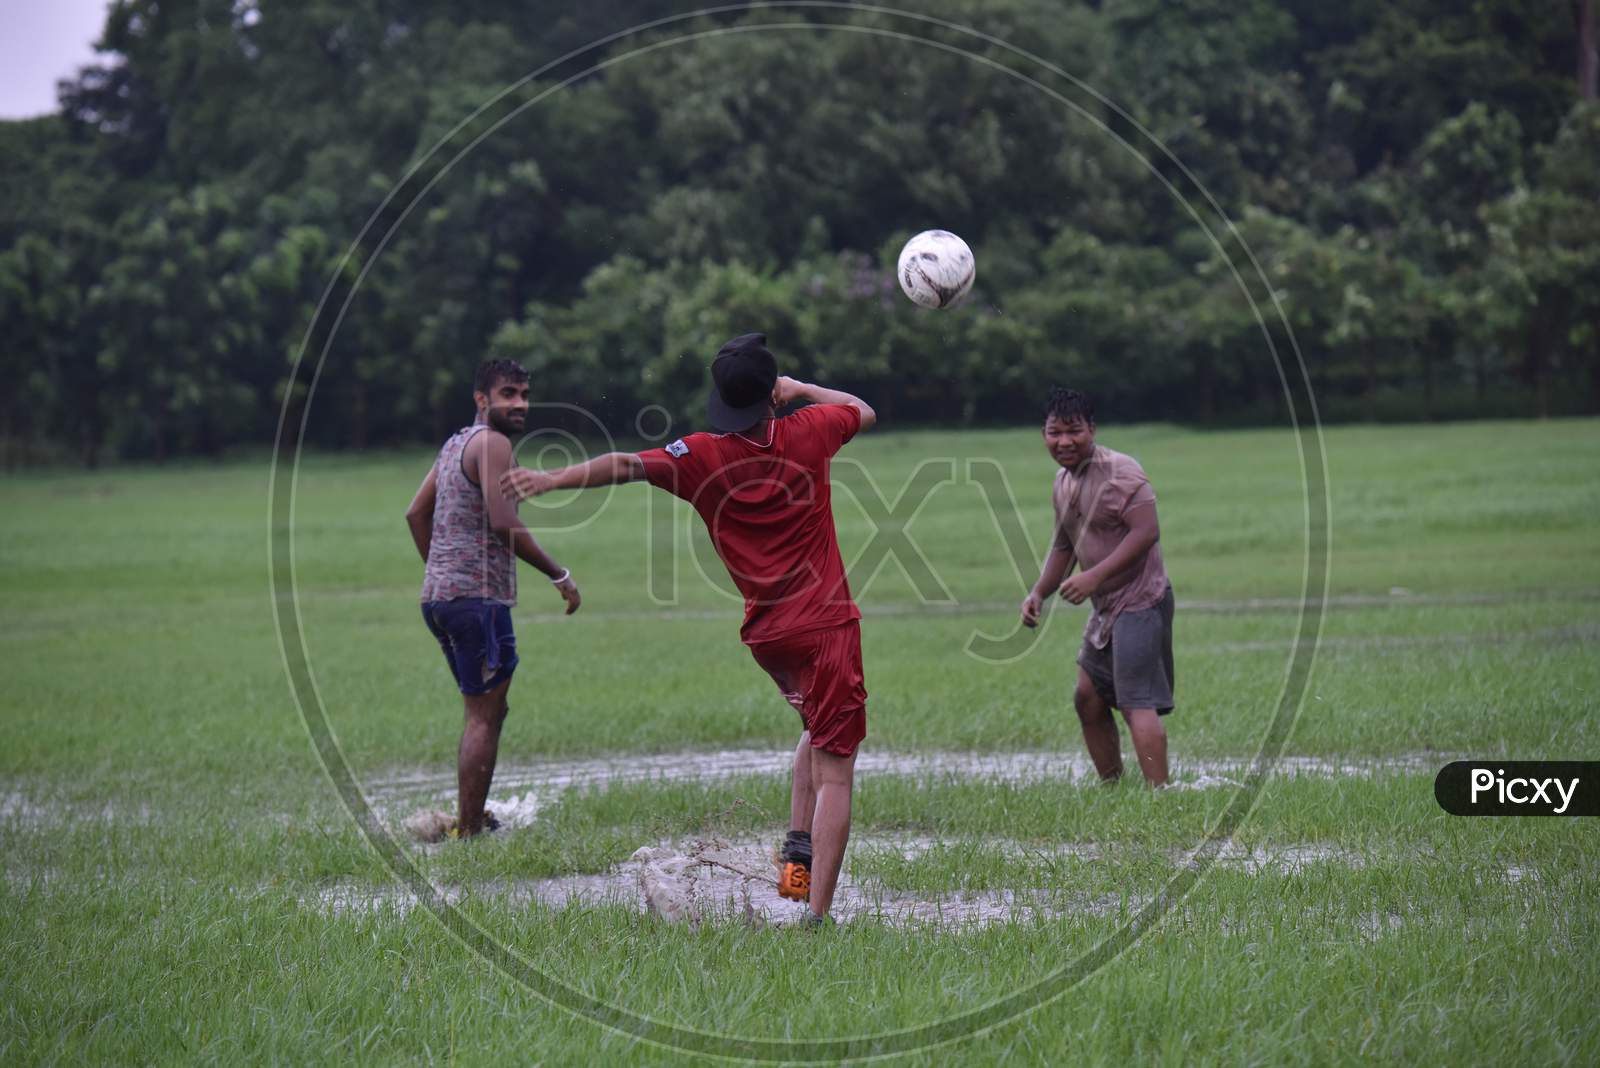 Indian boy attempting a free kick during rain